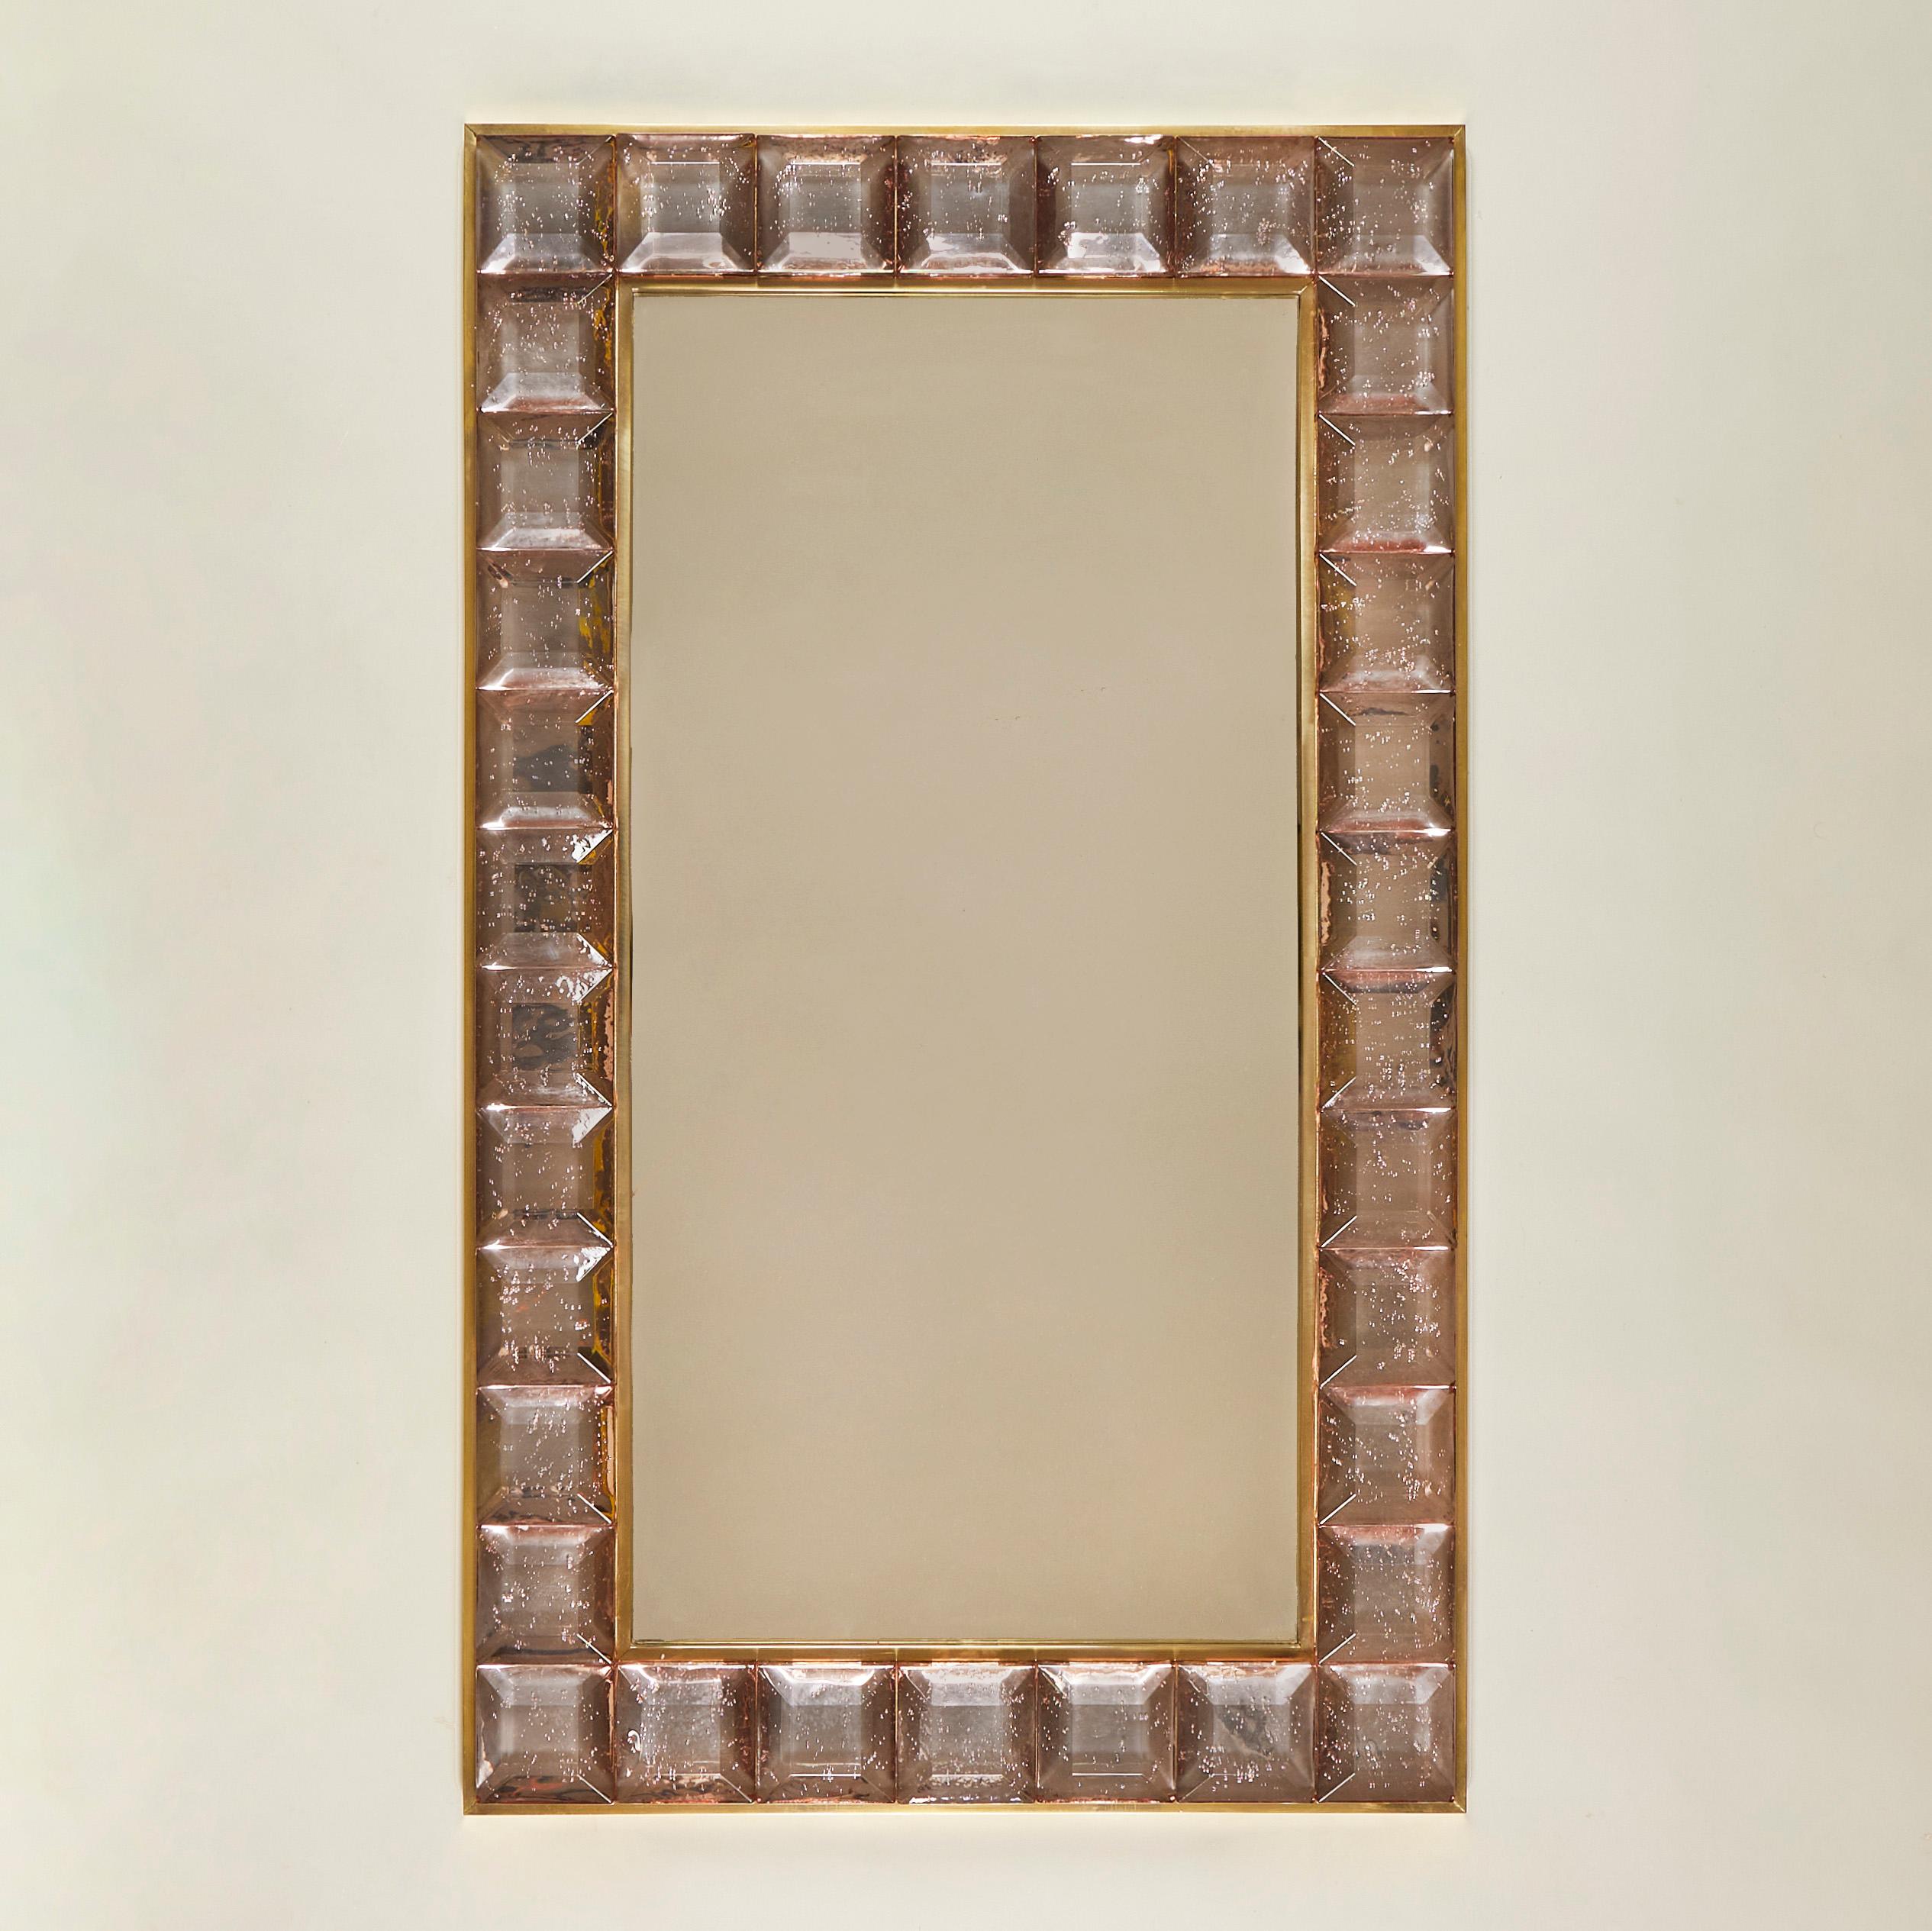 Stunning contemporary Italian rectangular mirror surrounded with 34 faceted Murano glass 'jewels' in soft shade of pale pink. The design incorporates a chic brass decorative edge to both the mirror and outer frame of the glass. The overall effect is